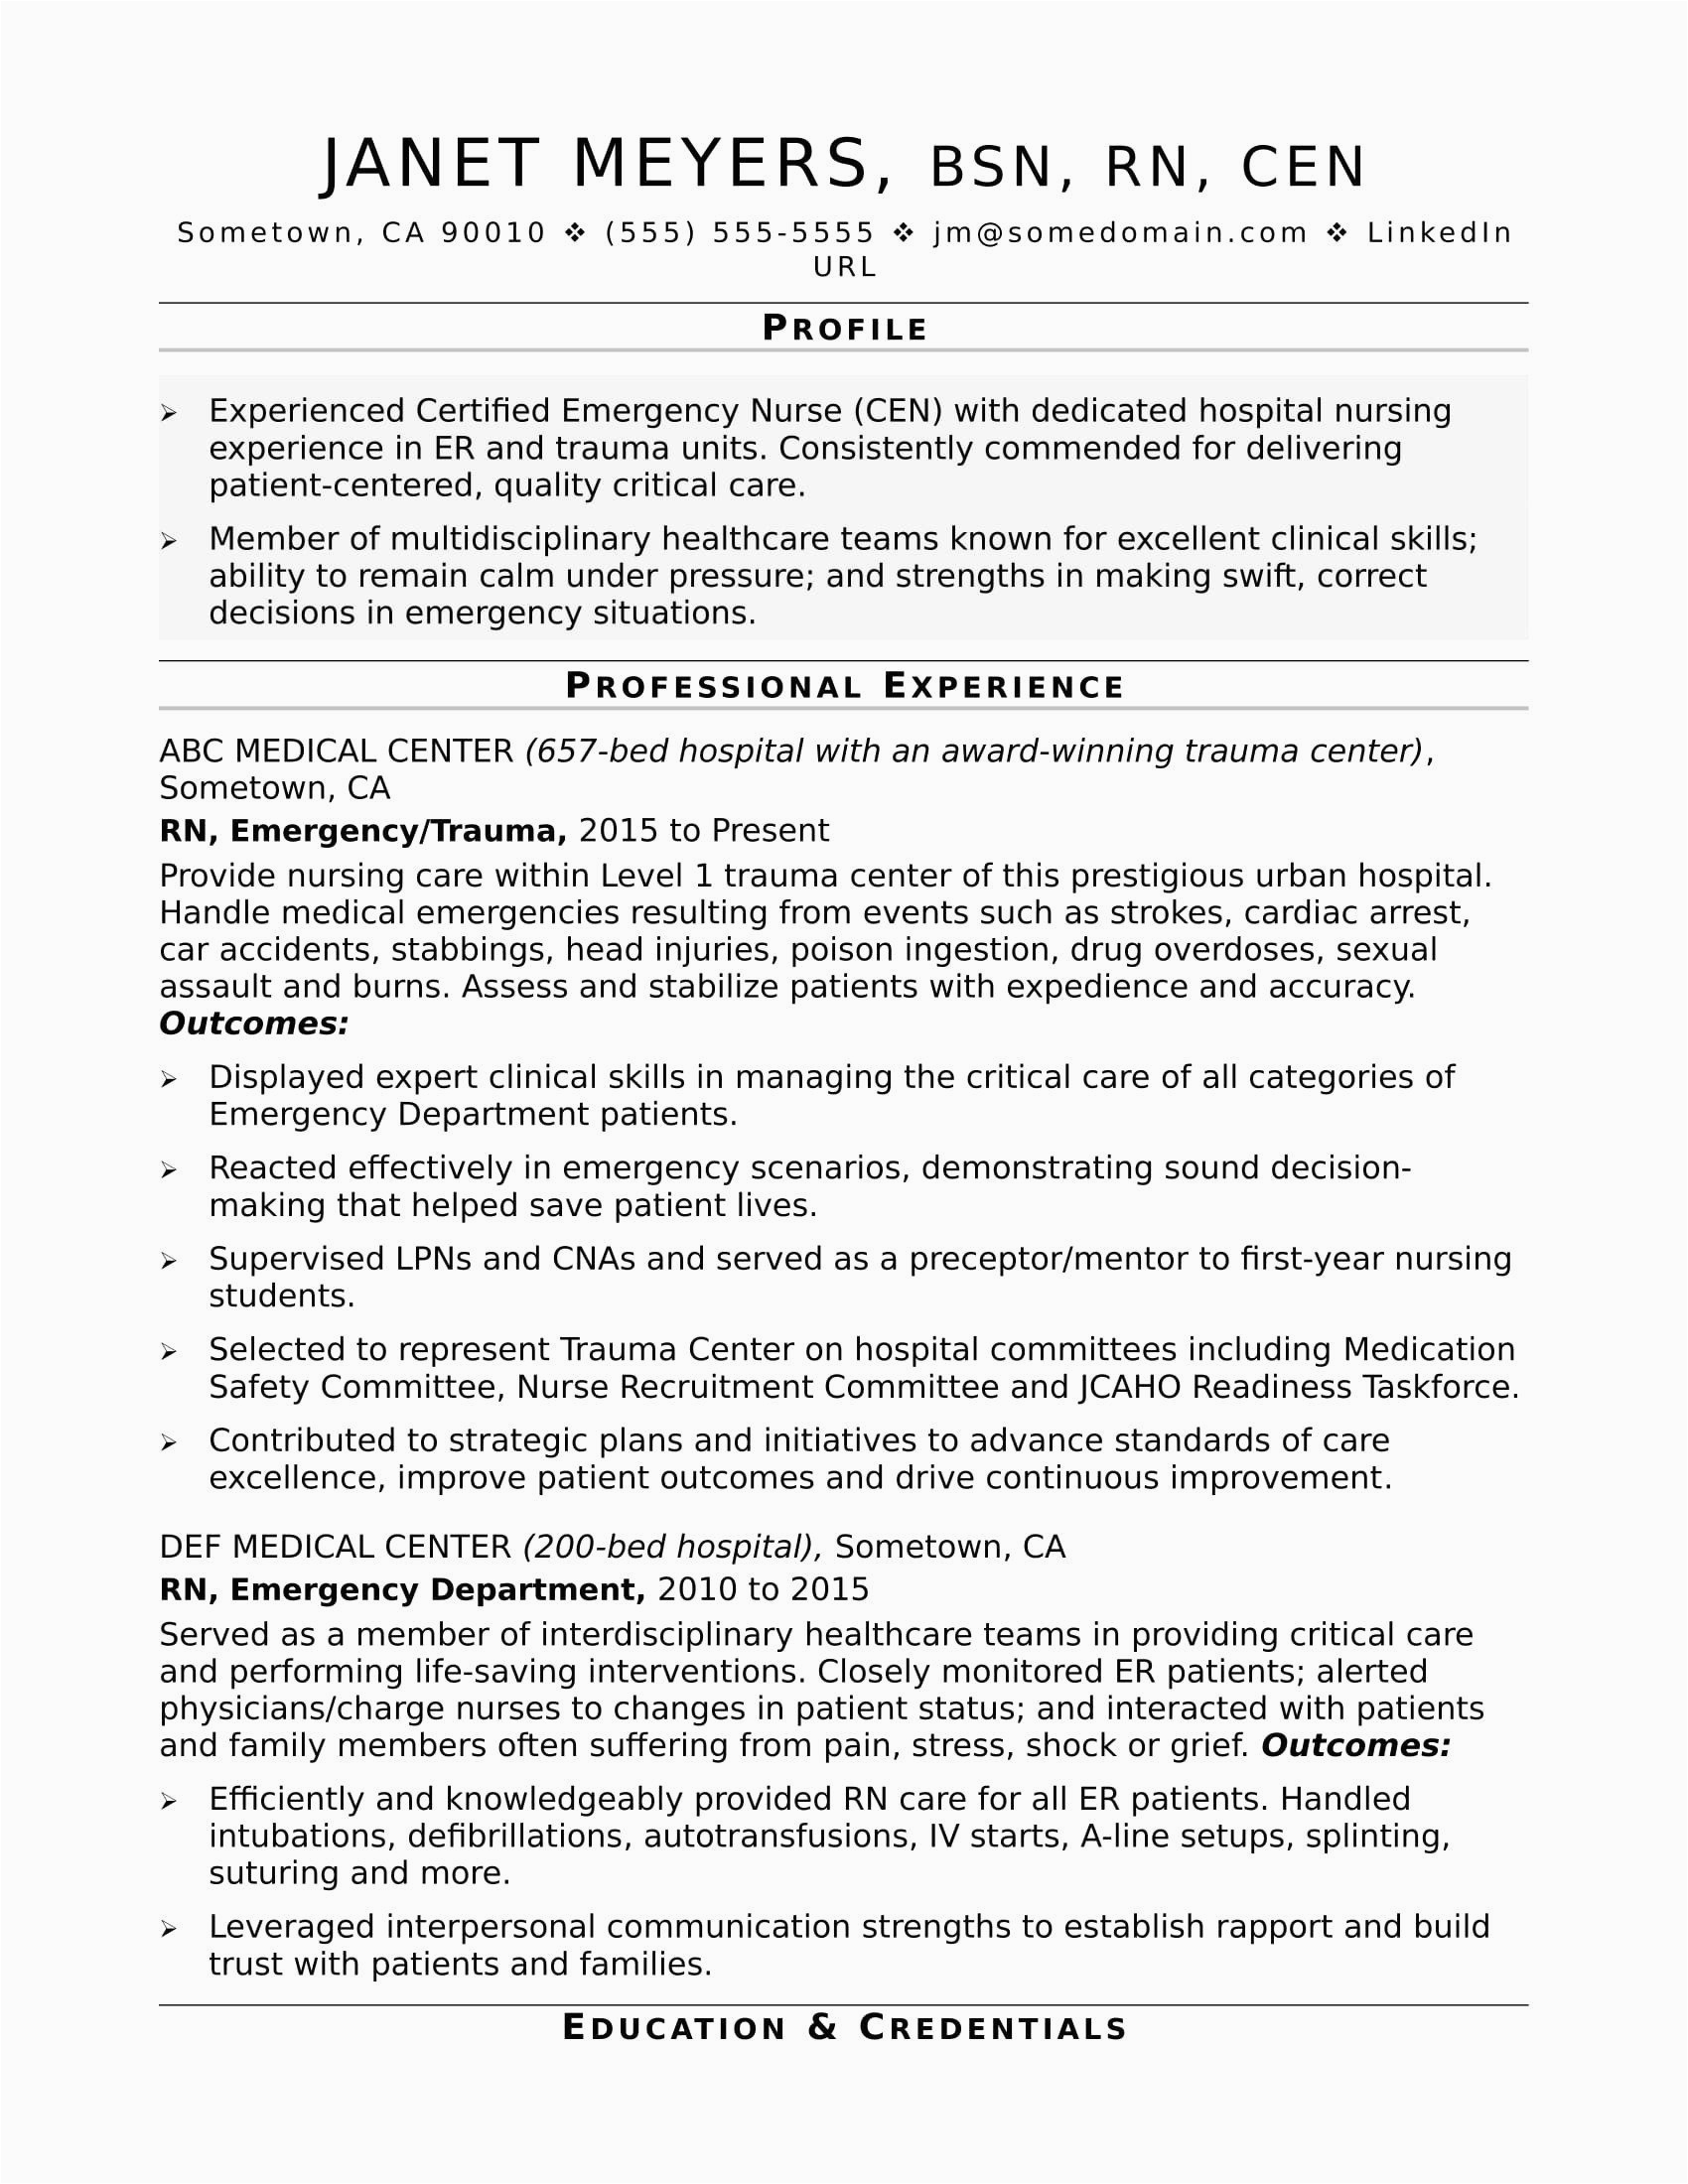 Sample Rn Resume with 25 Years Of Hospital Experience How to Put Nursing Clinical Experience Resume Resume Samples